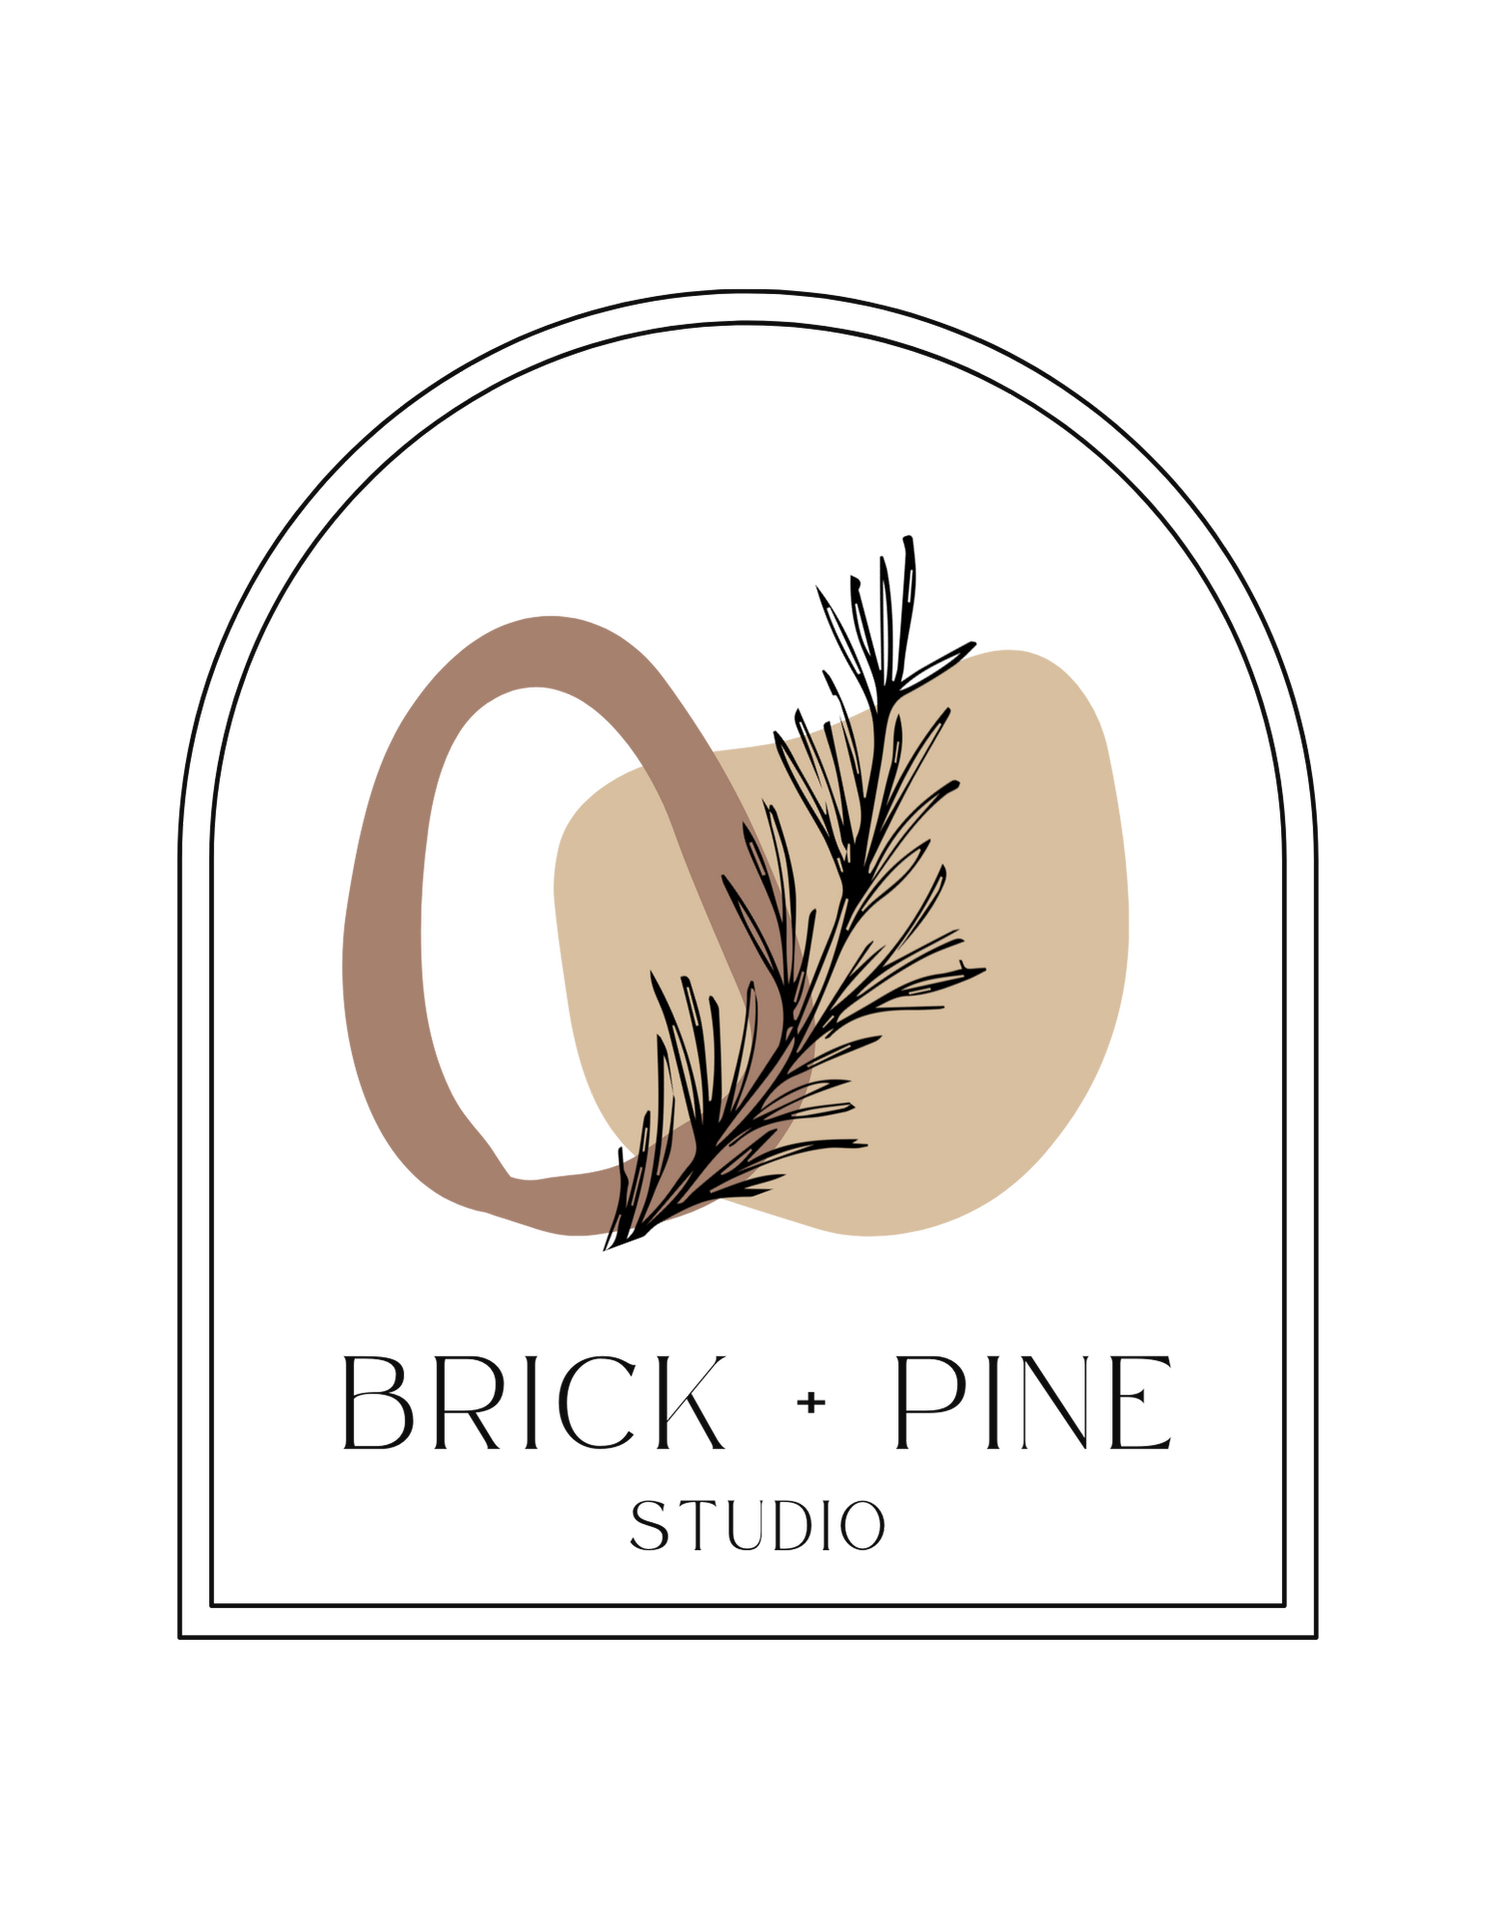 Brick + Pine Studio - photography studio, workshop, meeting and small event rental space Carson City